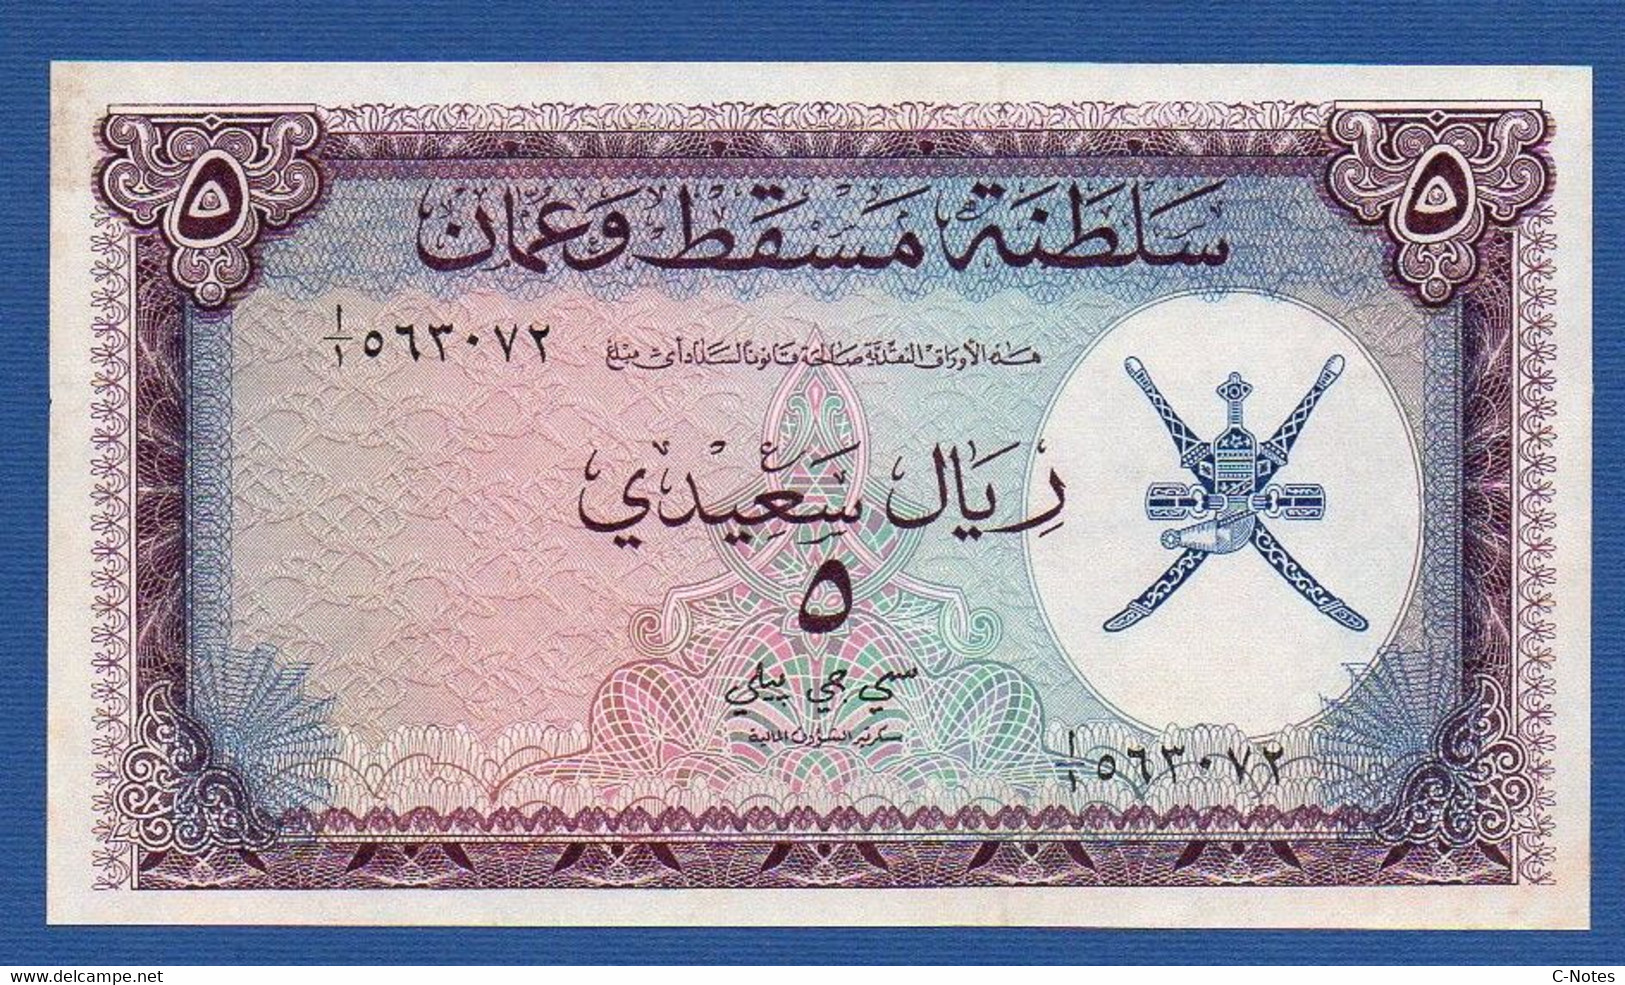 OMAN  - P. 5 – 5 Rials ND (1970) AUNC See Photos SULTANATE OF MUSCAT AND OMAN - Oman